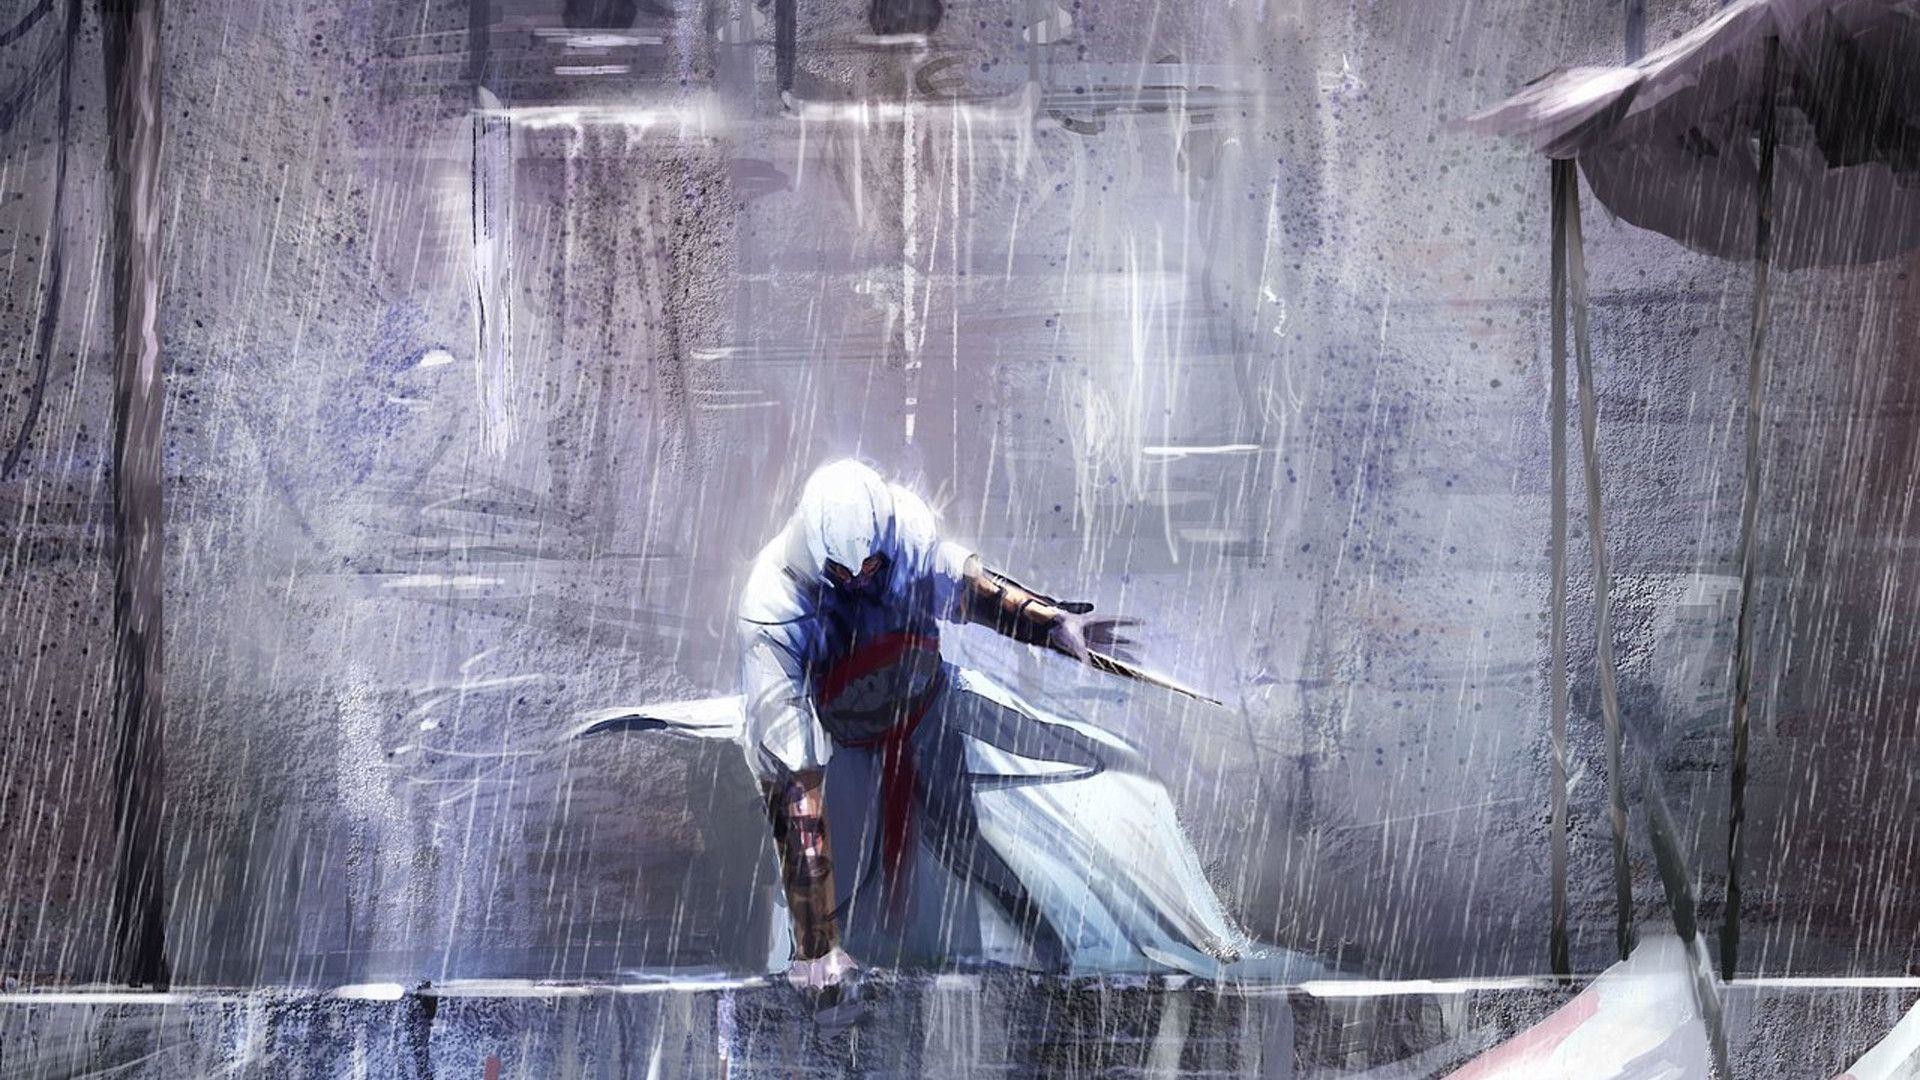 1920x1080 games hd assassins creed | Desktop Backgrounds for Free HD .